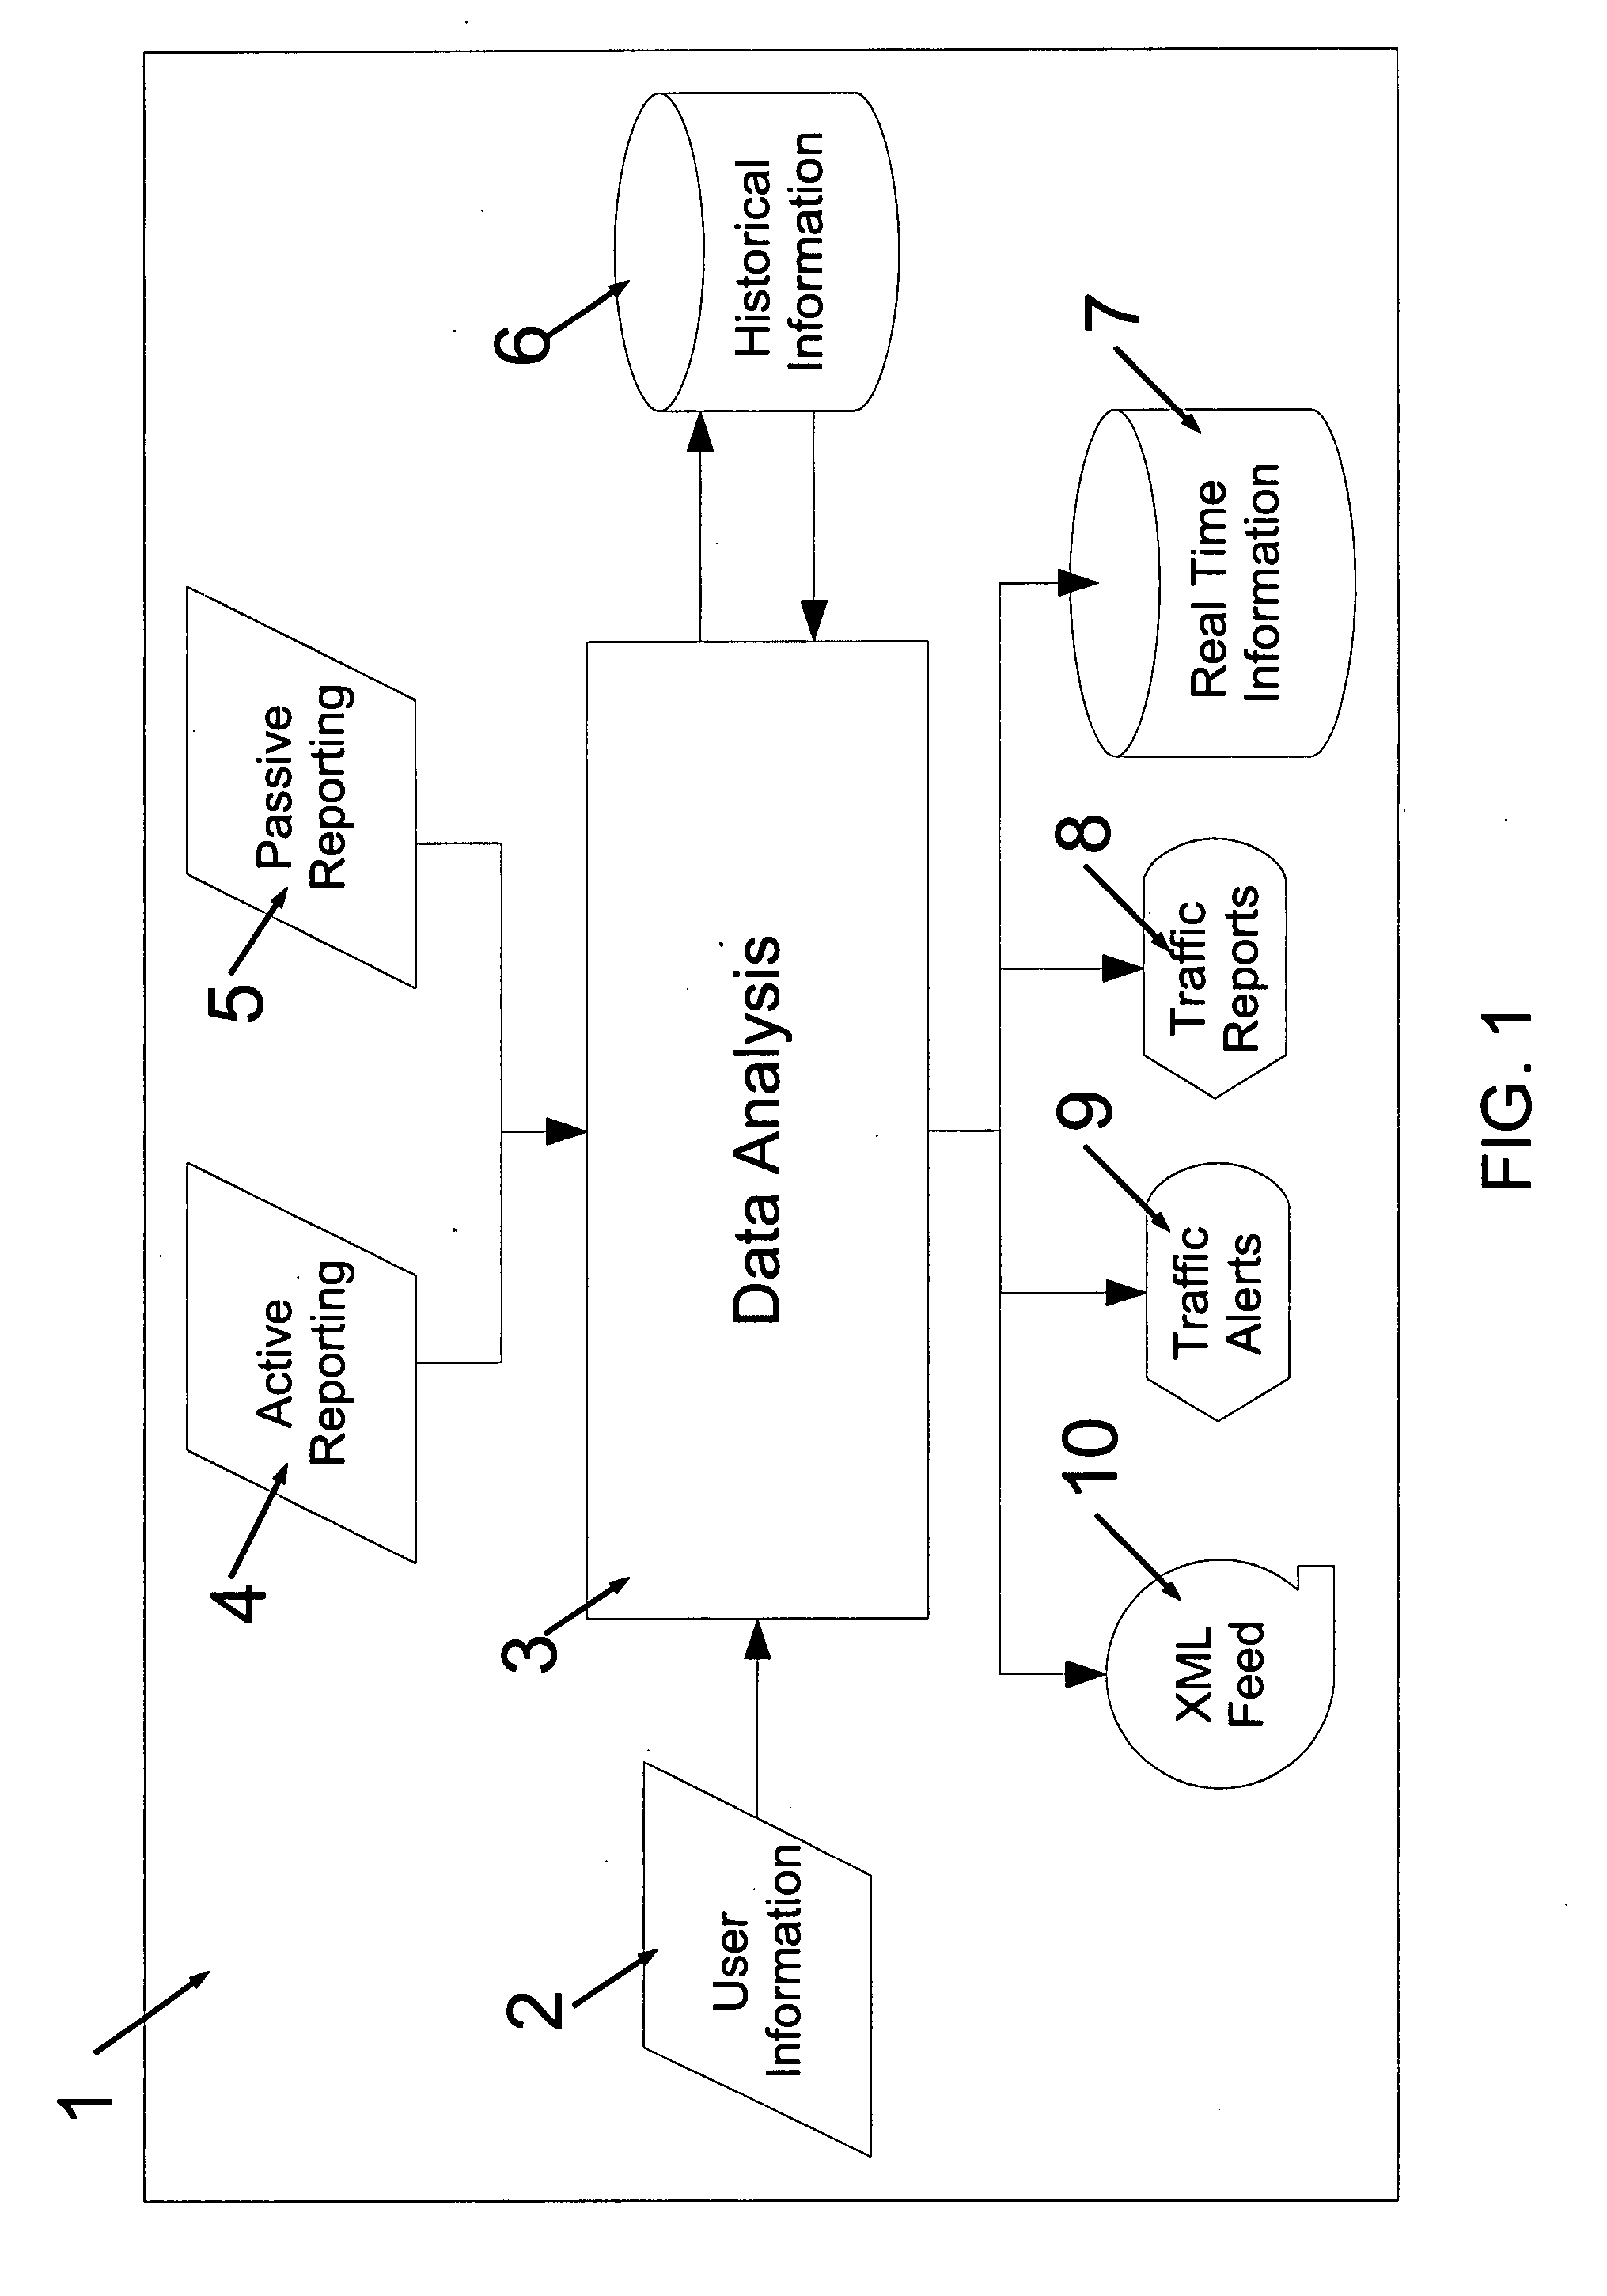 Traffic incidents processing system and method for sharing real time traffic information